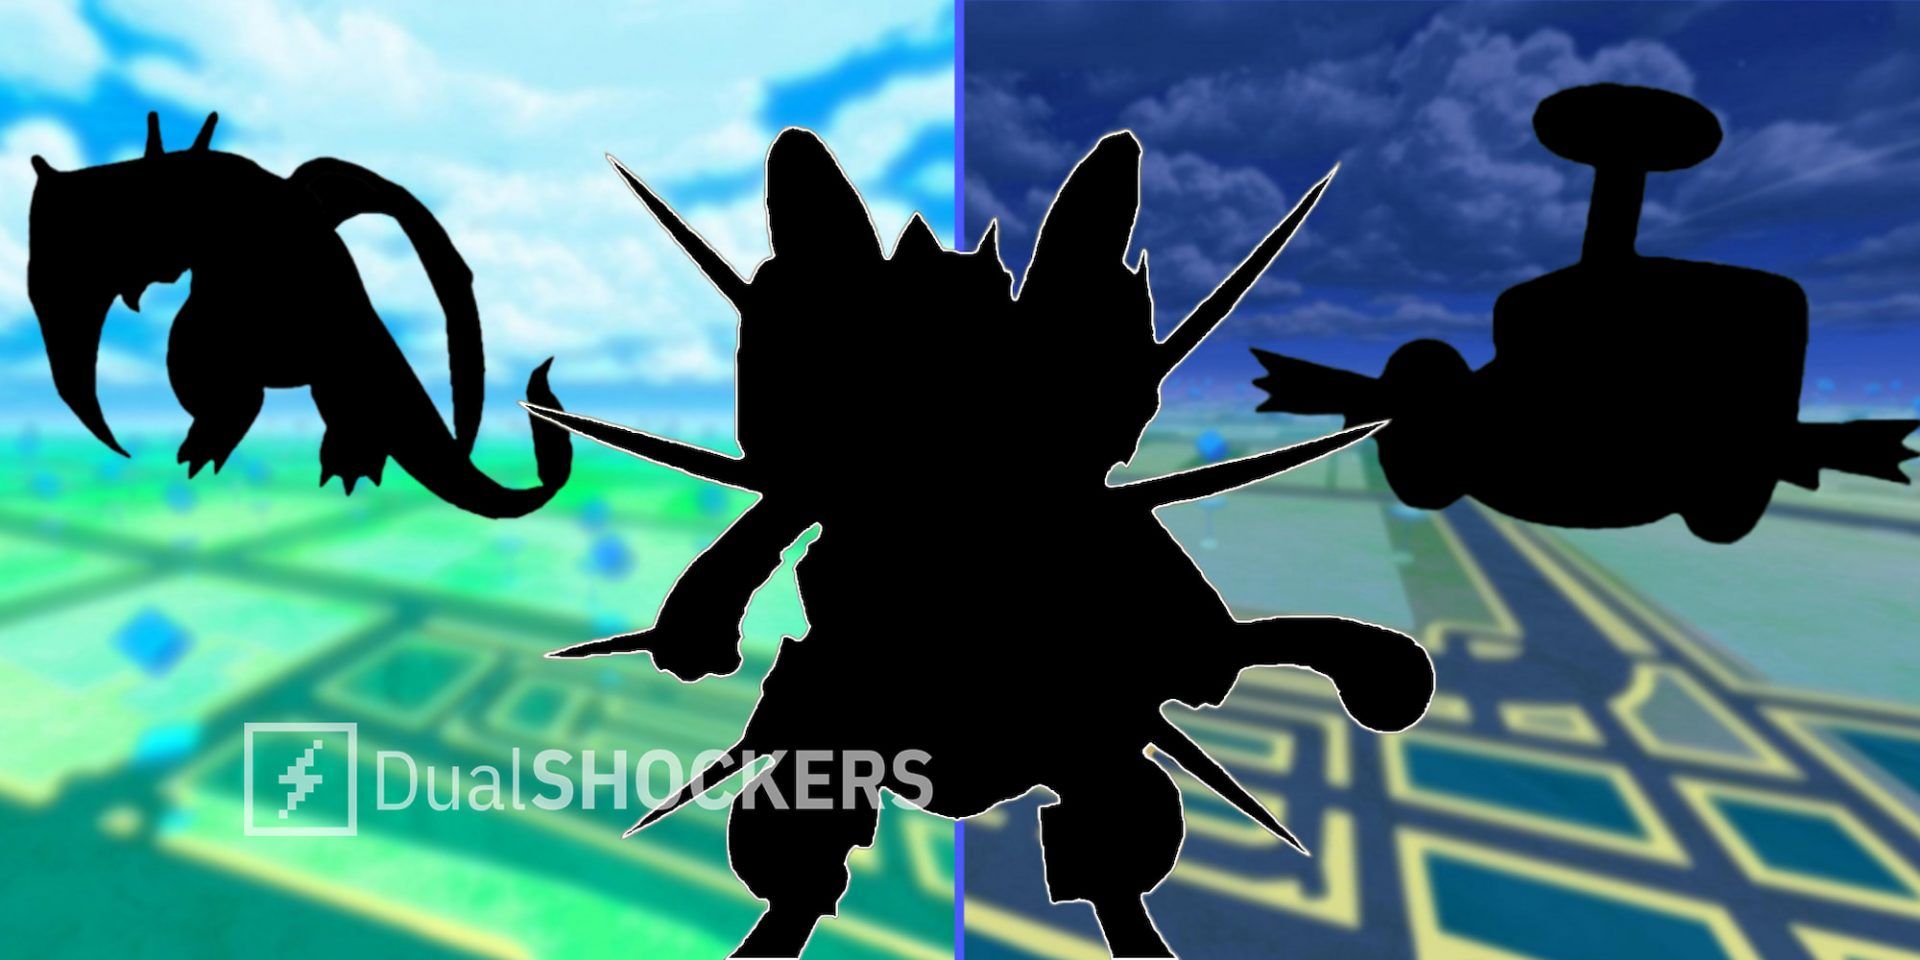 Pokemon GO sprites blacked out, showing Charizard, Armored Mewtwo, and Rotom standing side by side.